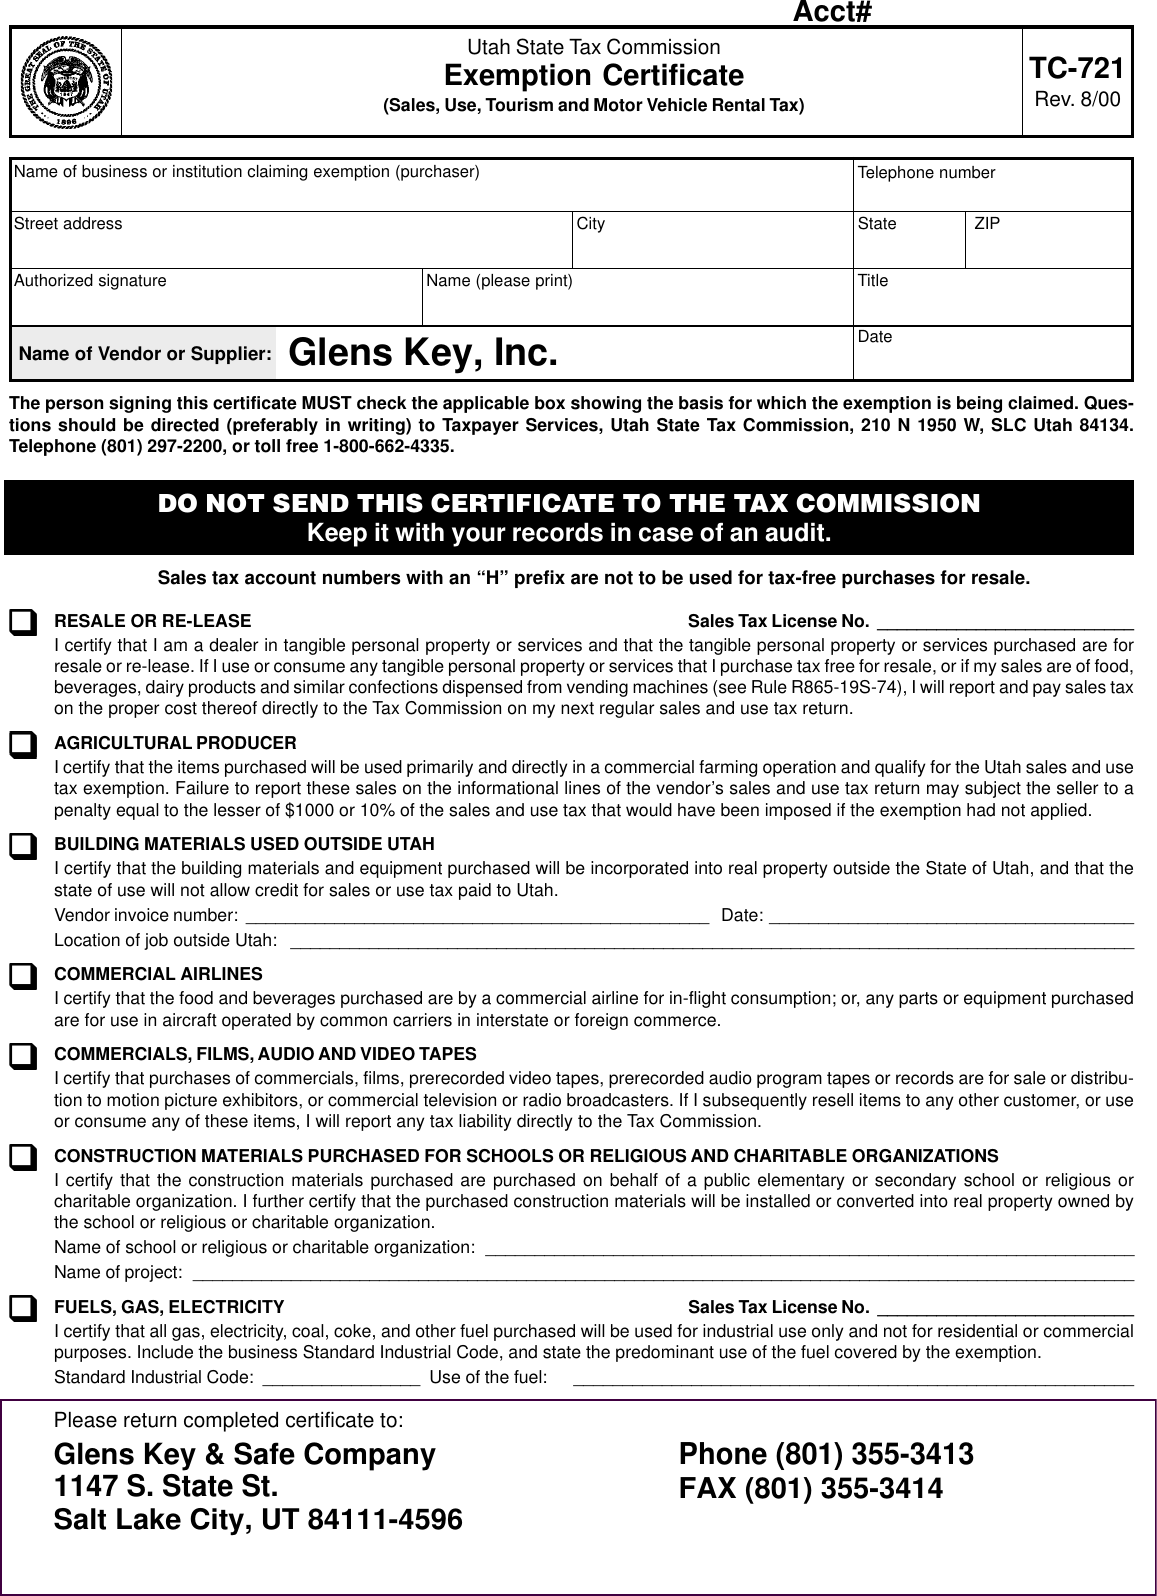 Page 1 of 2 - Locks  Utah State Sales Tax Exemption Form ( With Glens Key Filled In) TC-721-2000Glens